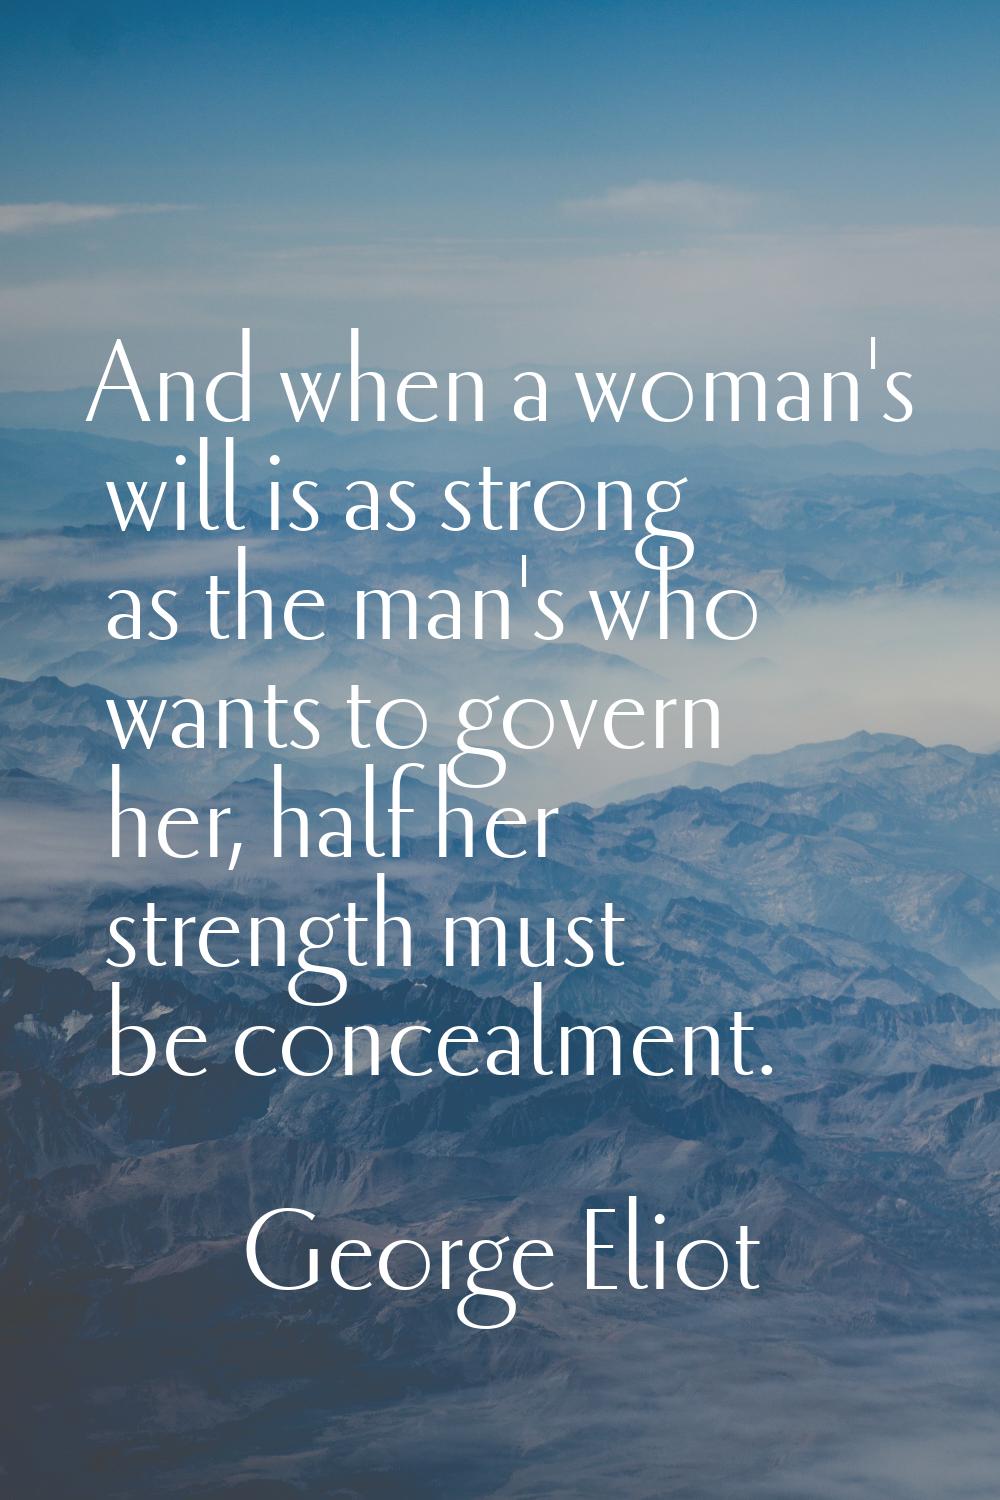 And when a woman's will is as strong as the man's who wants to govern her, half her strength must b